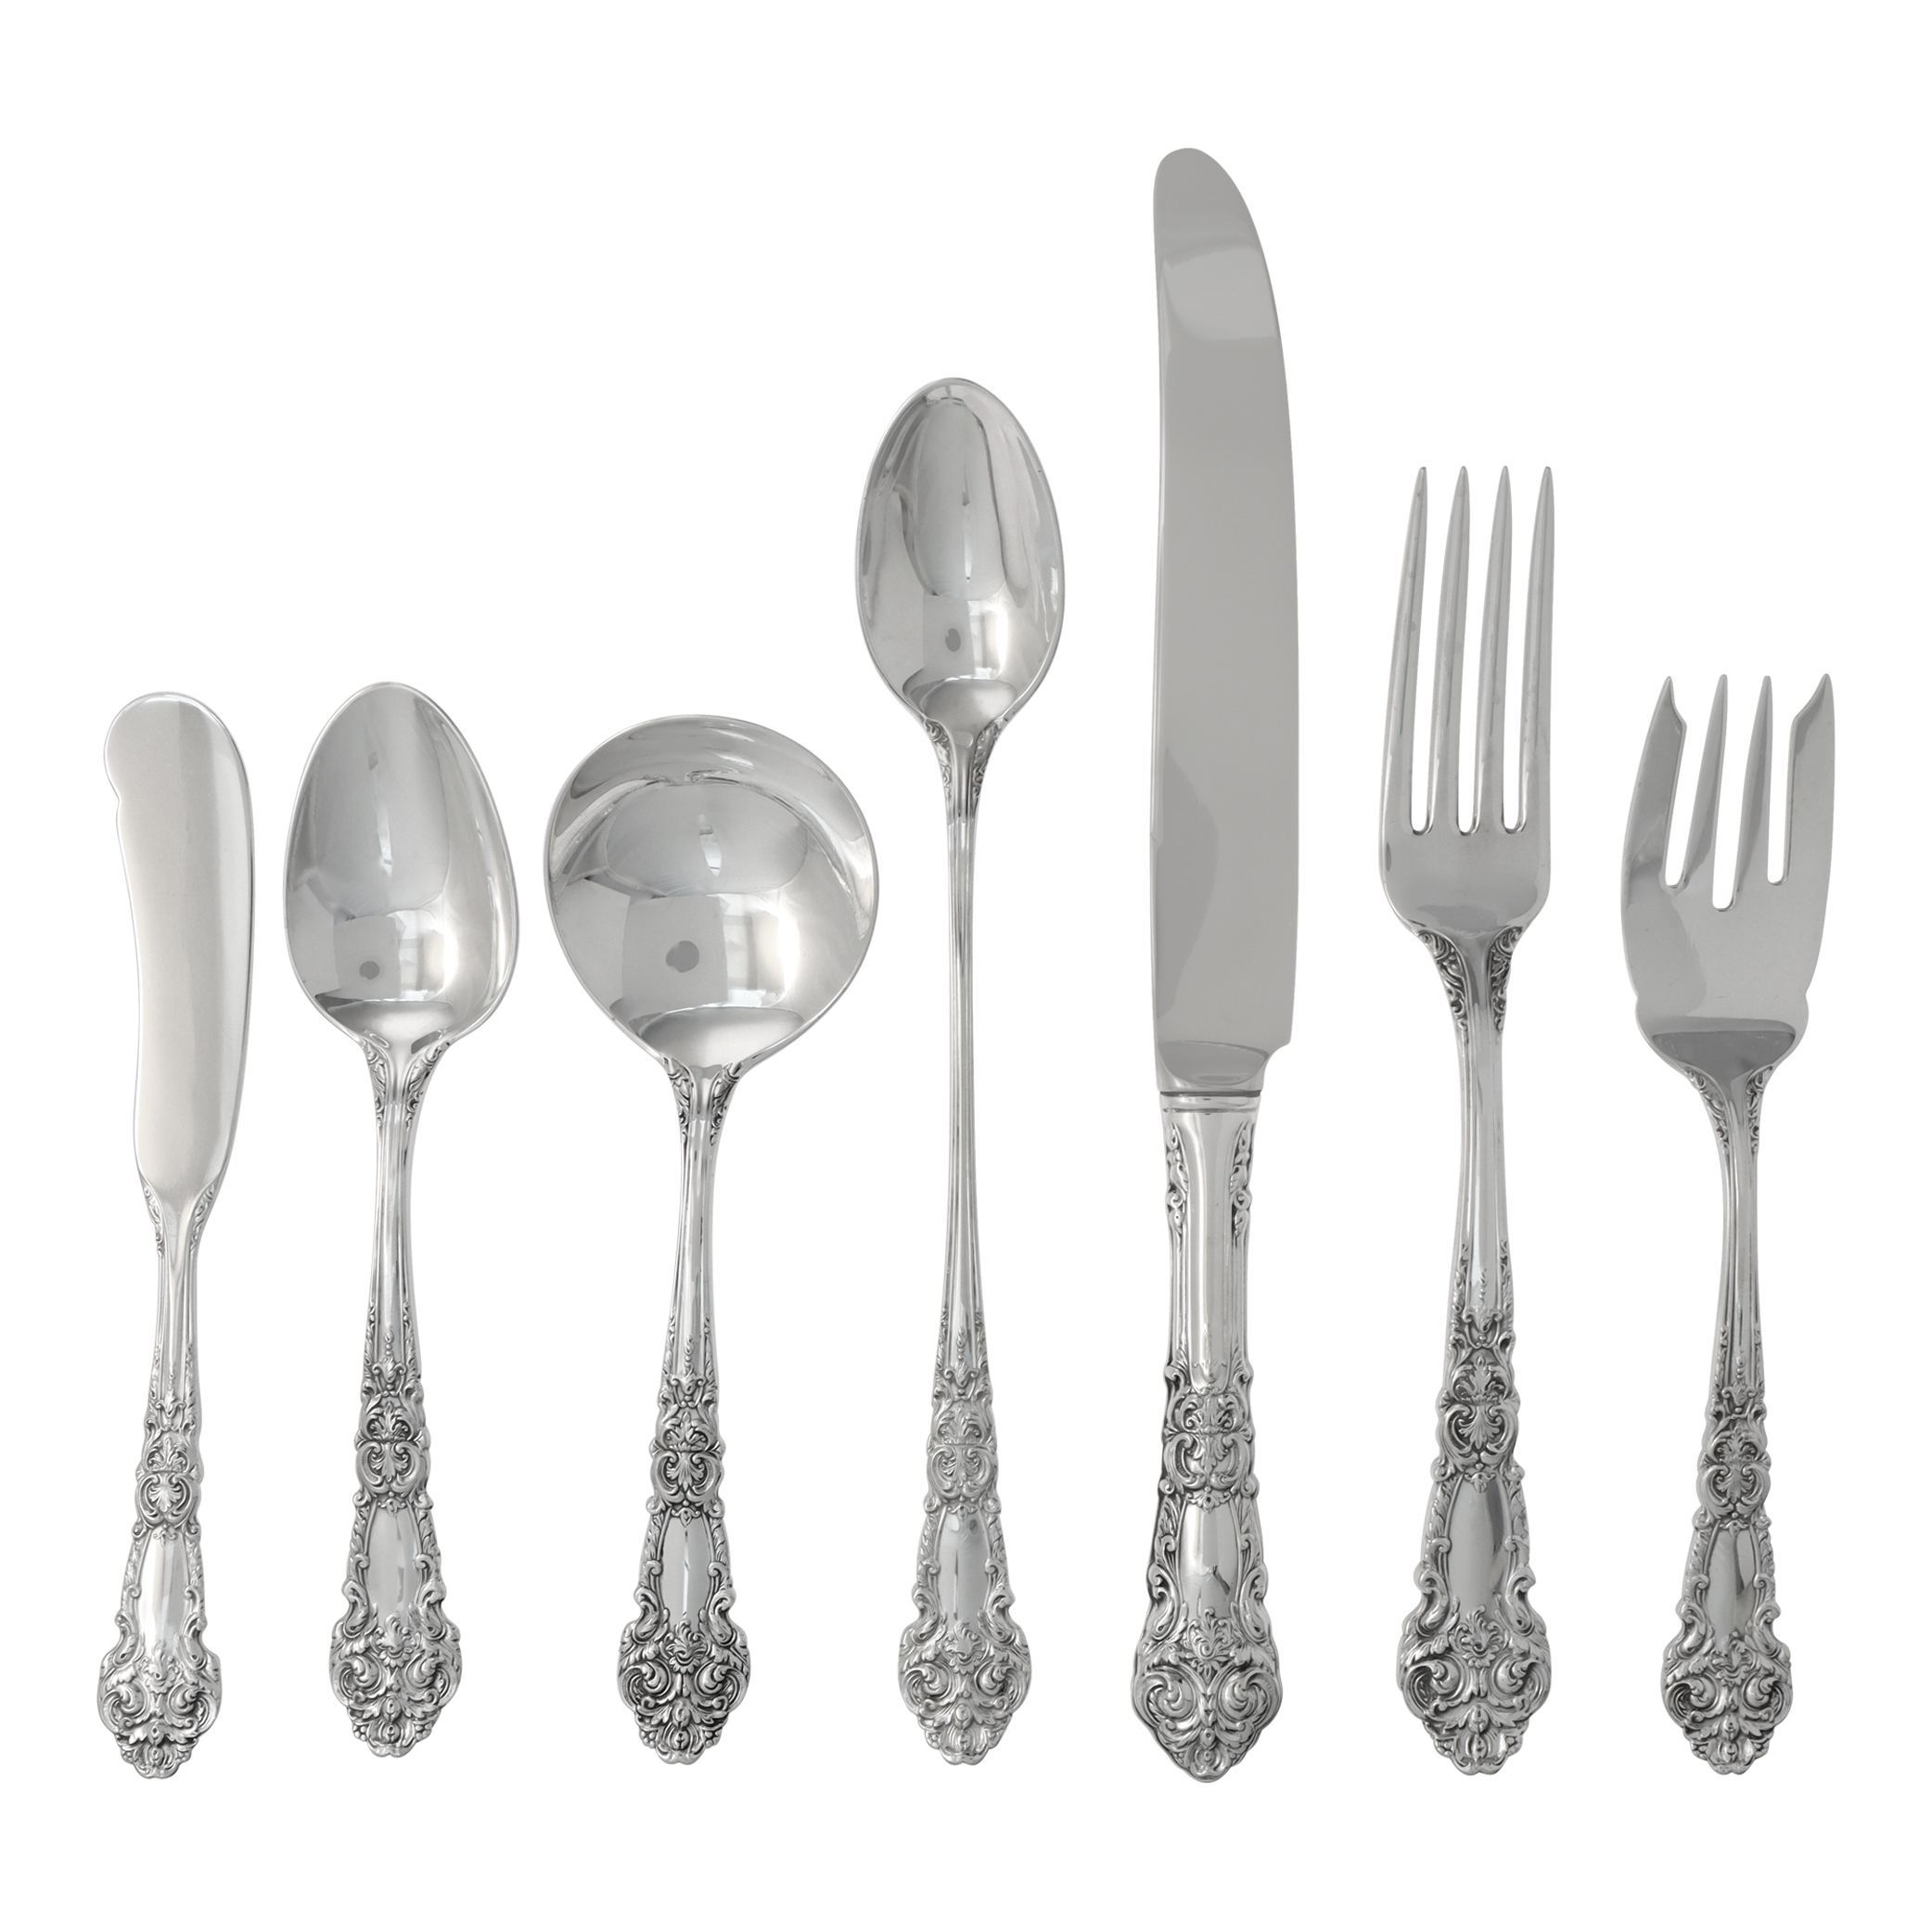 "FRENCH RENAISSANCE" sterling silver flatware set patented in 1941 by Reed & Barton- 5 place setting for 12 + 8 serving pieces- Over 76 Oz troy sterling silver. image 1